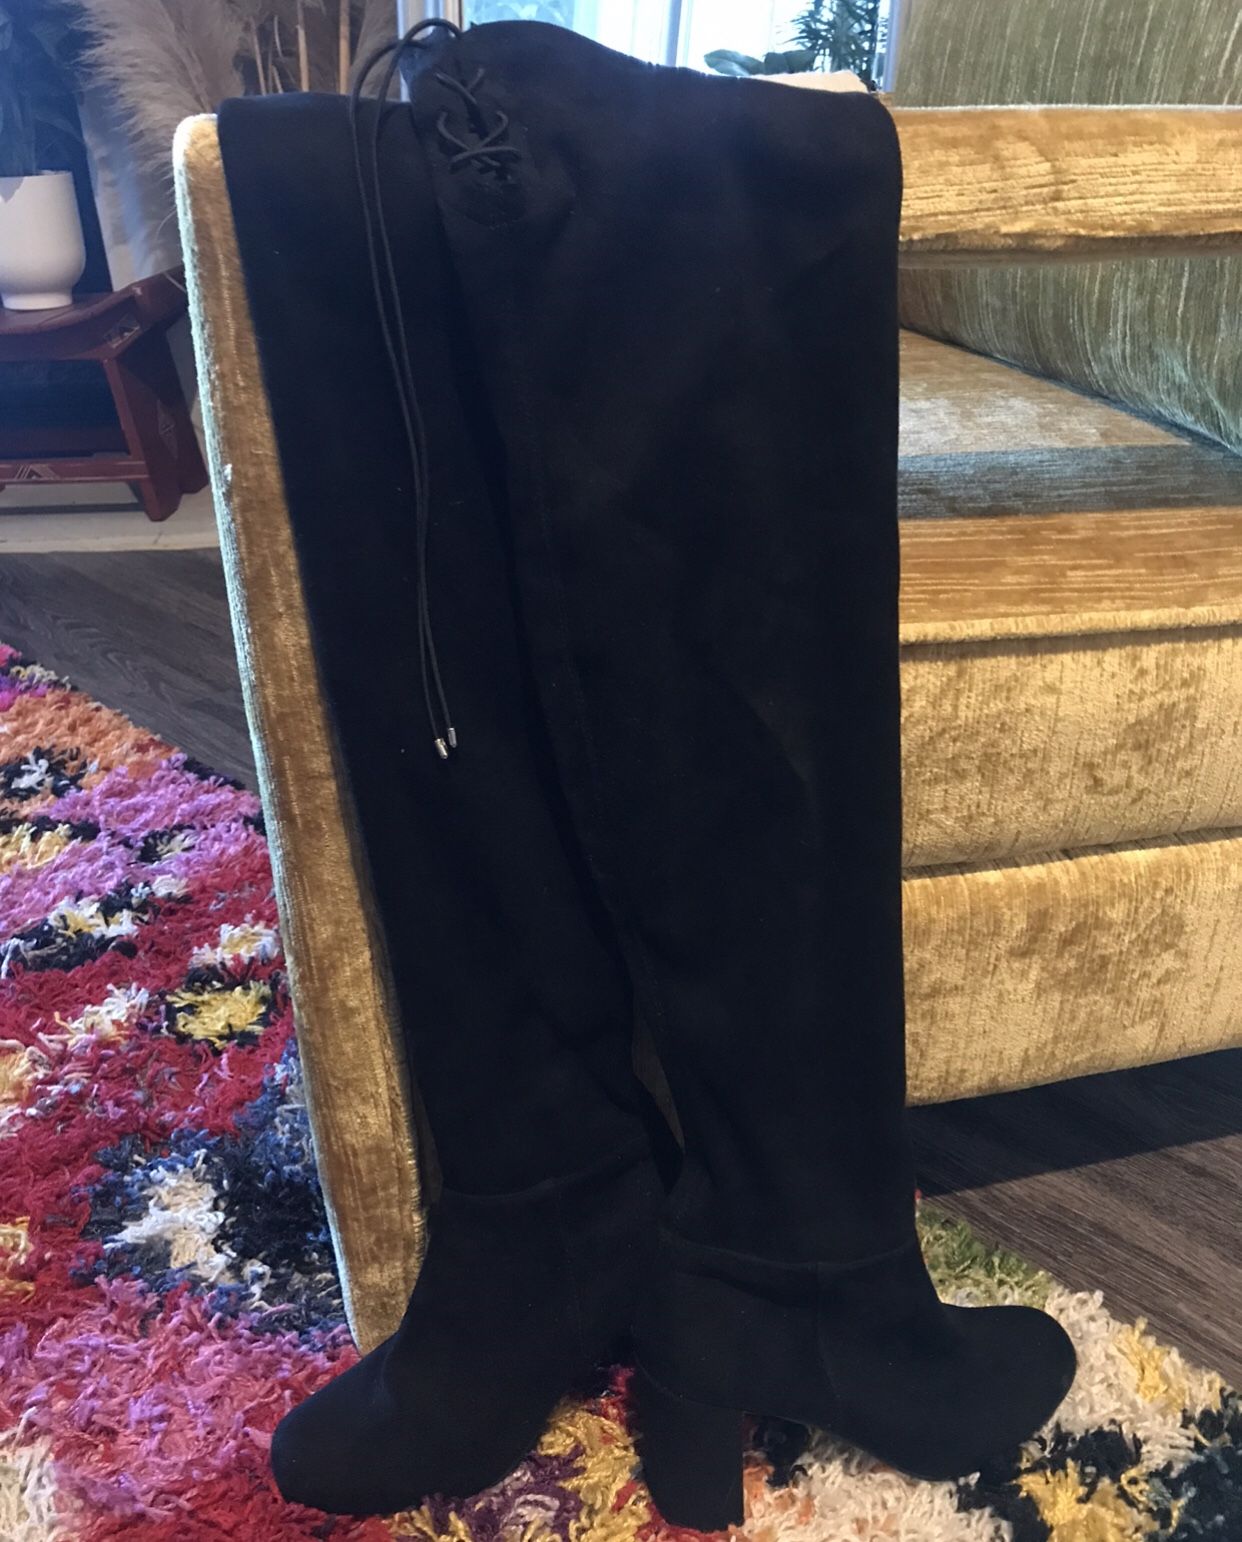 Chinese Laundry Black Thigh High Boots Sz 6.5